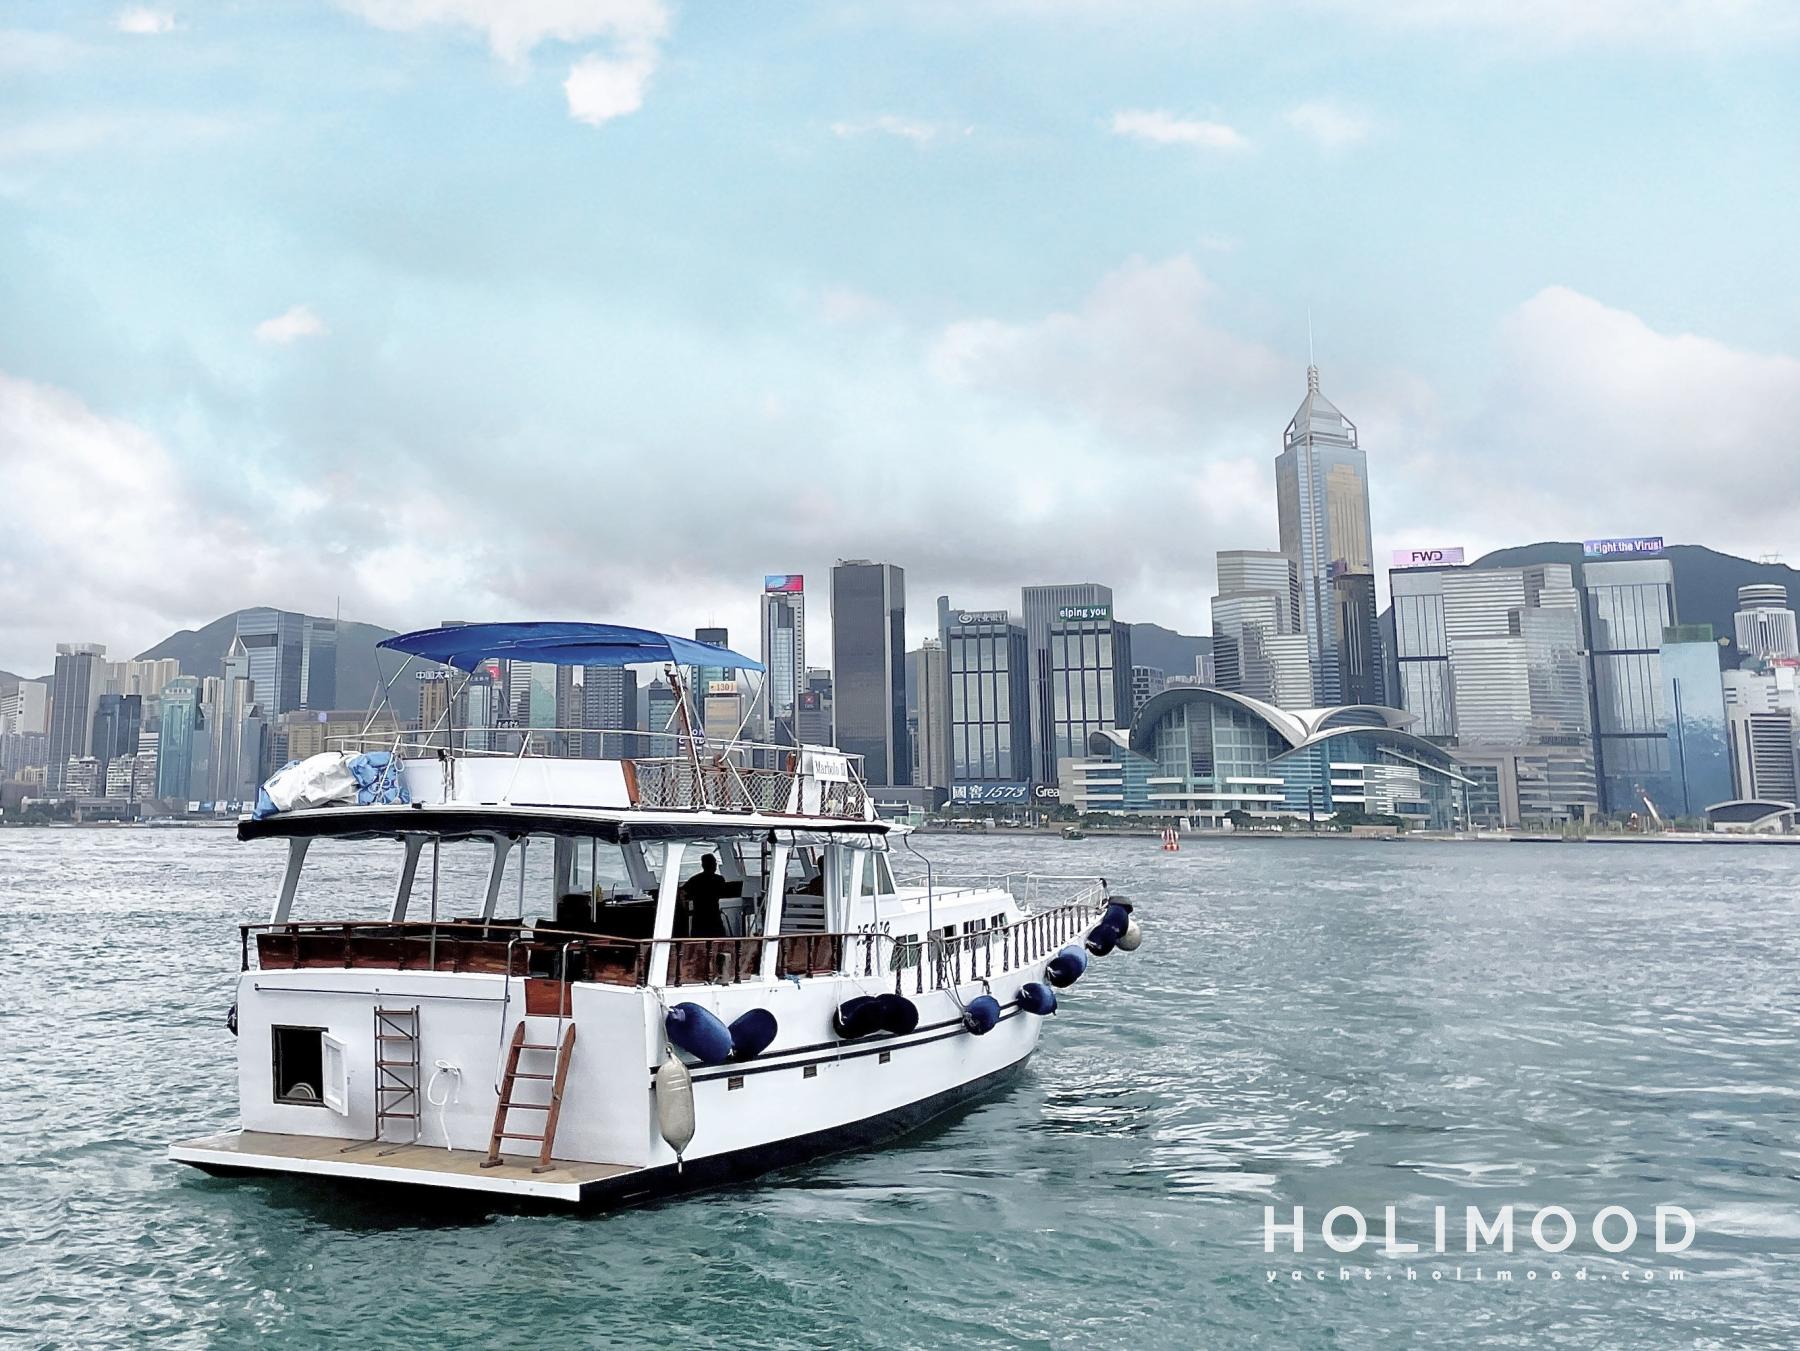 LT01 Pick up & drop off at Victoria Harbour , Spacious, from $428/ppl Boat Party All Inclusive Package (recommended for weekdays) 3